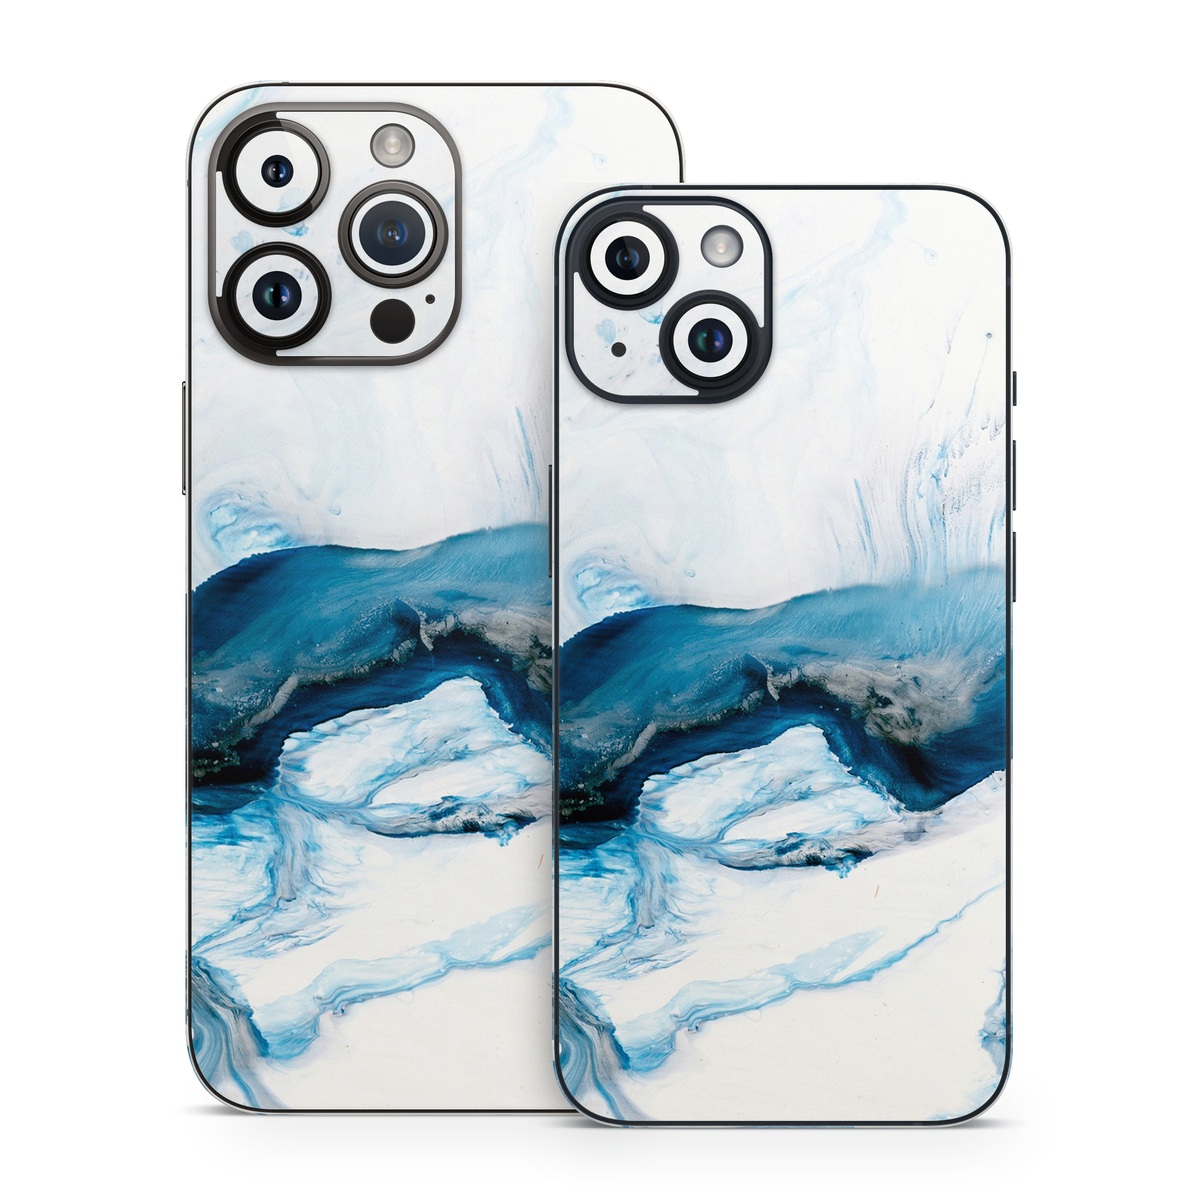 iPhone 14 Skin design of Glacial landform, Blue, Water, Glacier, Sky, Arctic, Ice cap, Watercolor paint, Drawing, Art, with white, blue, black colors